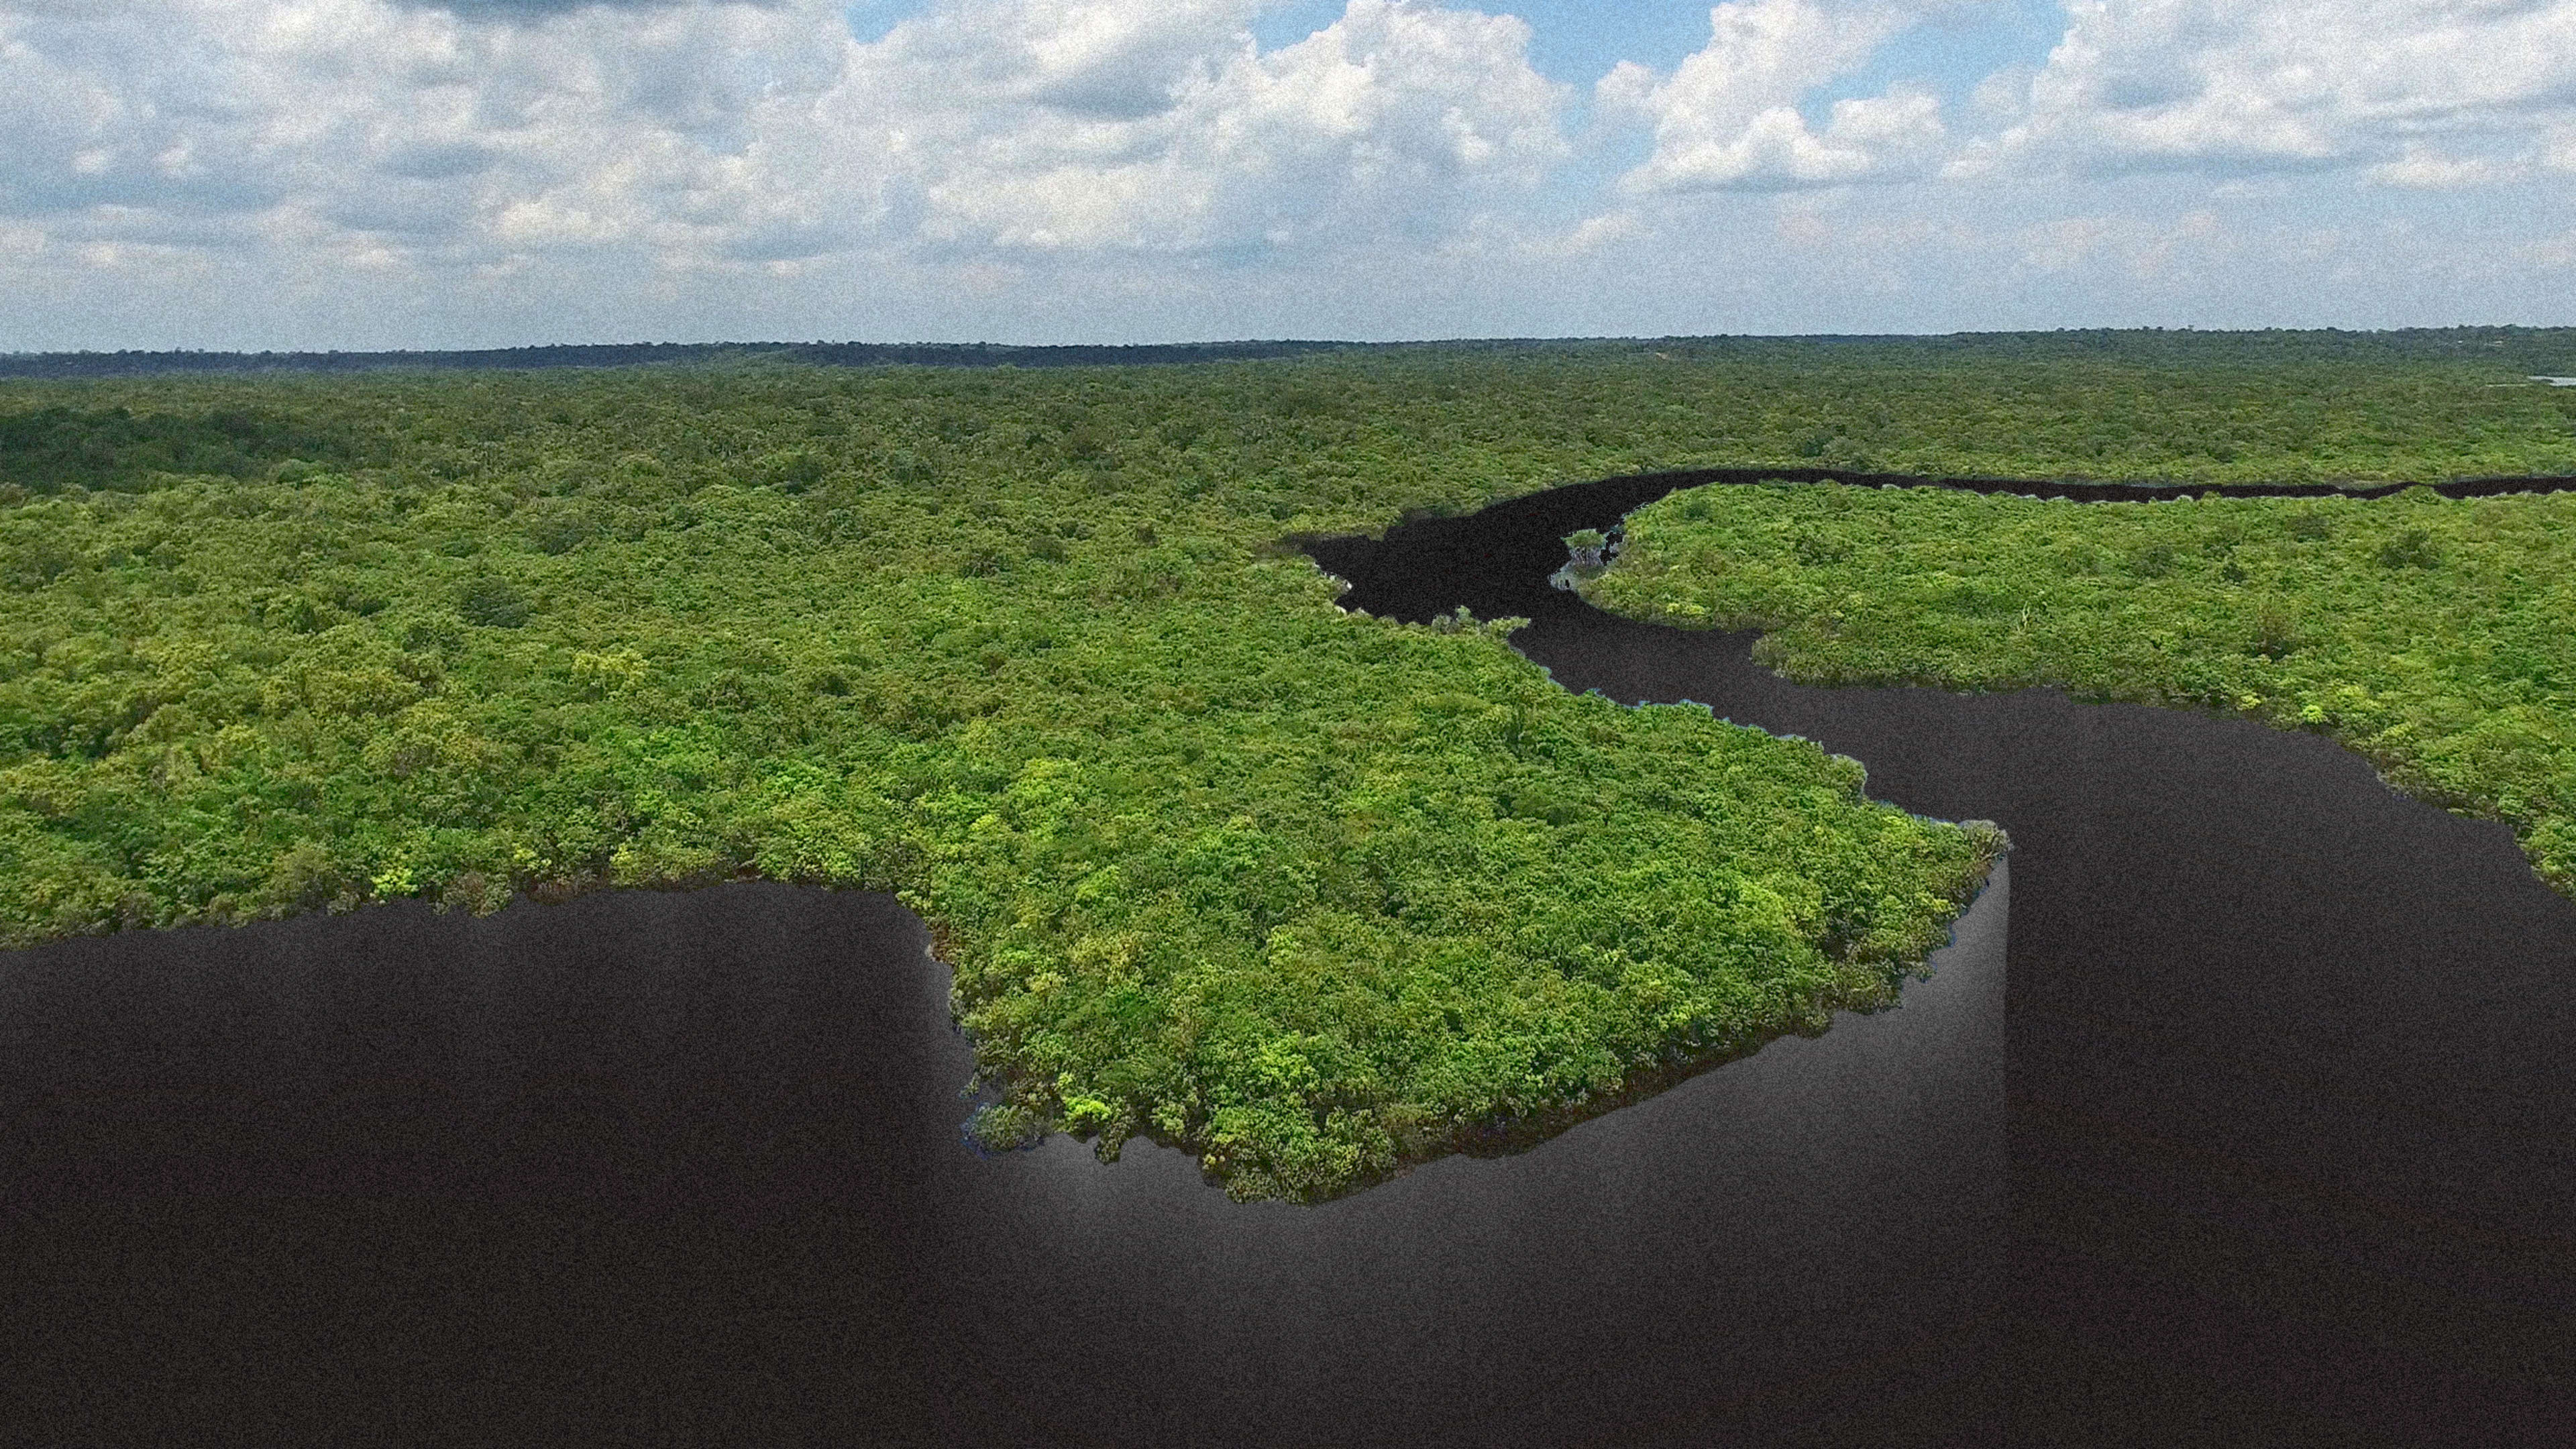 The Amazon rainforest could disappear within our lifetime